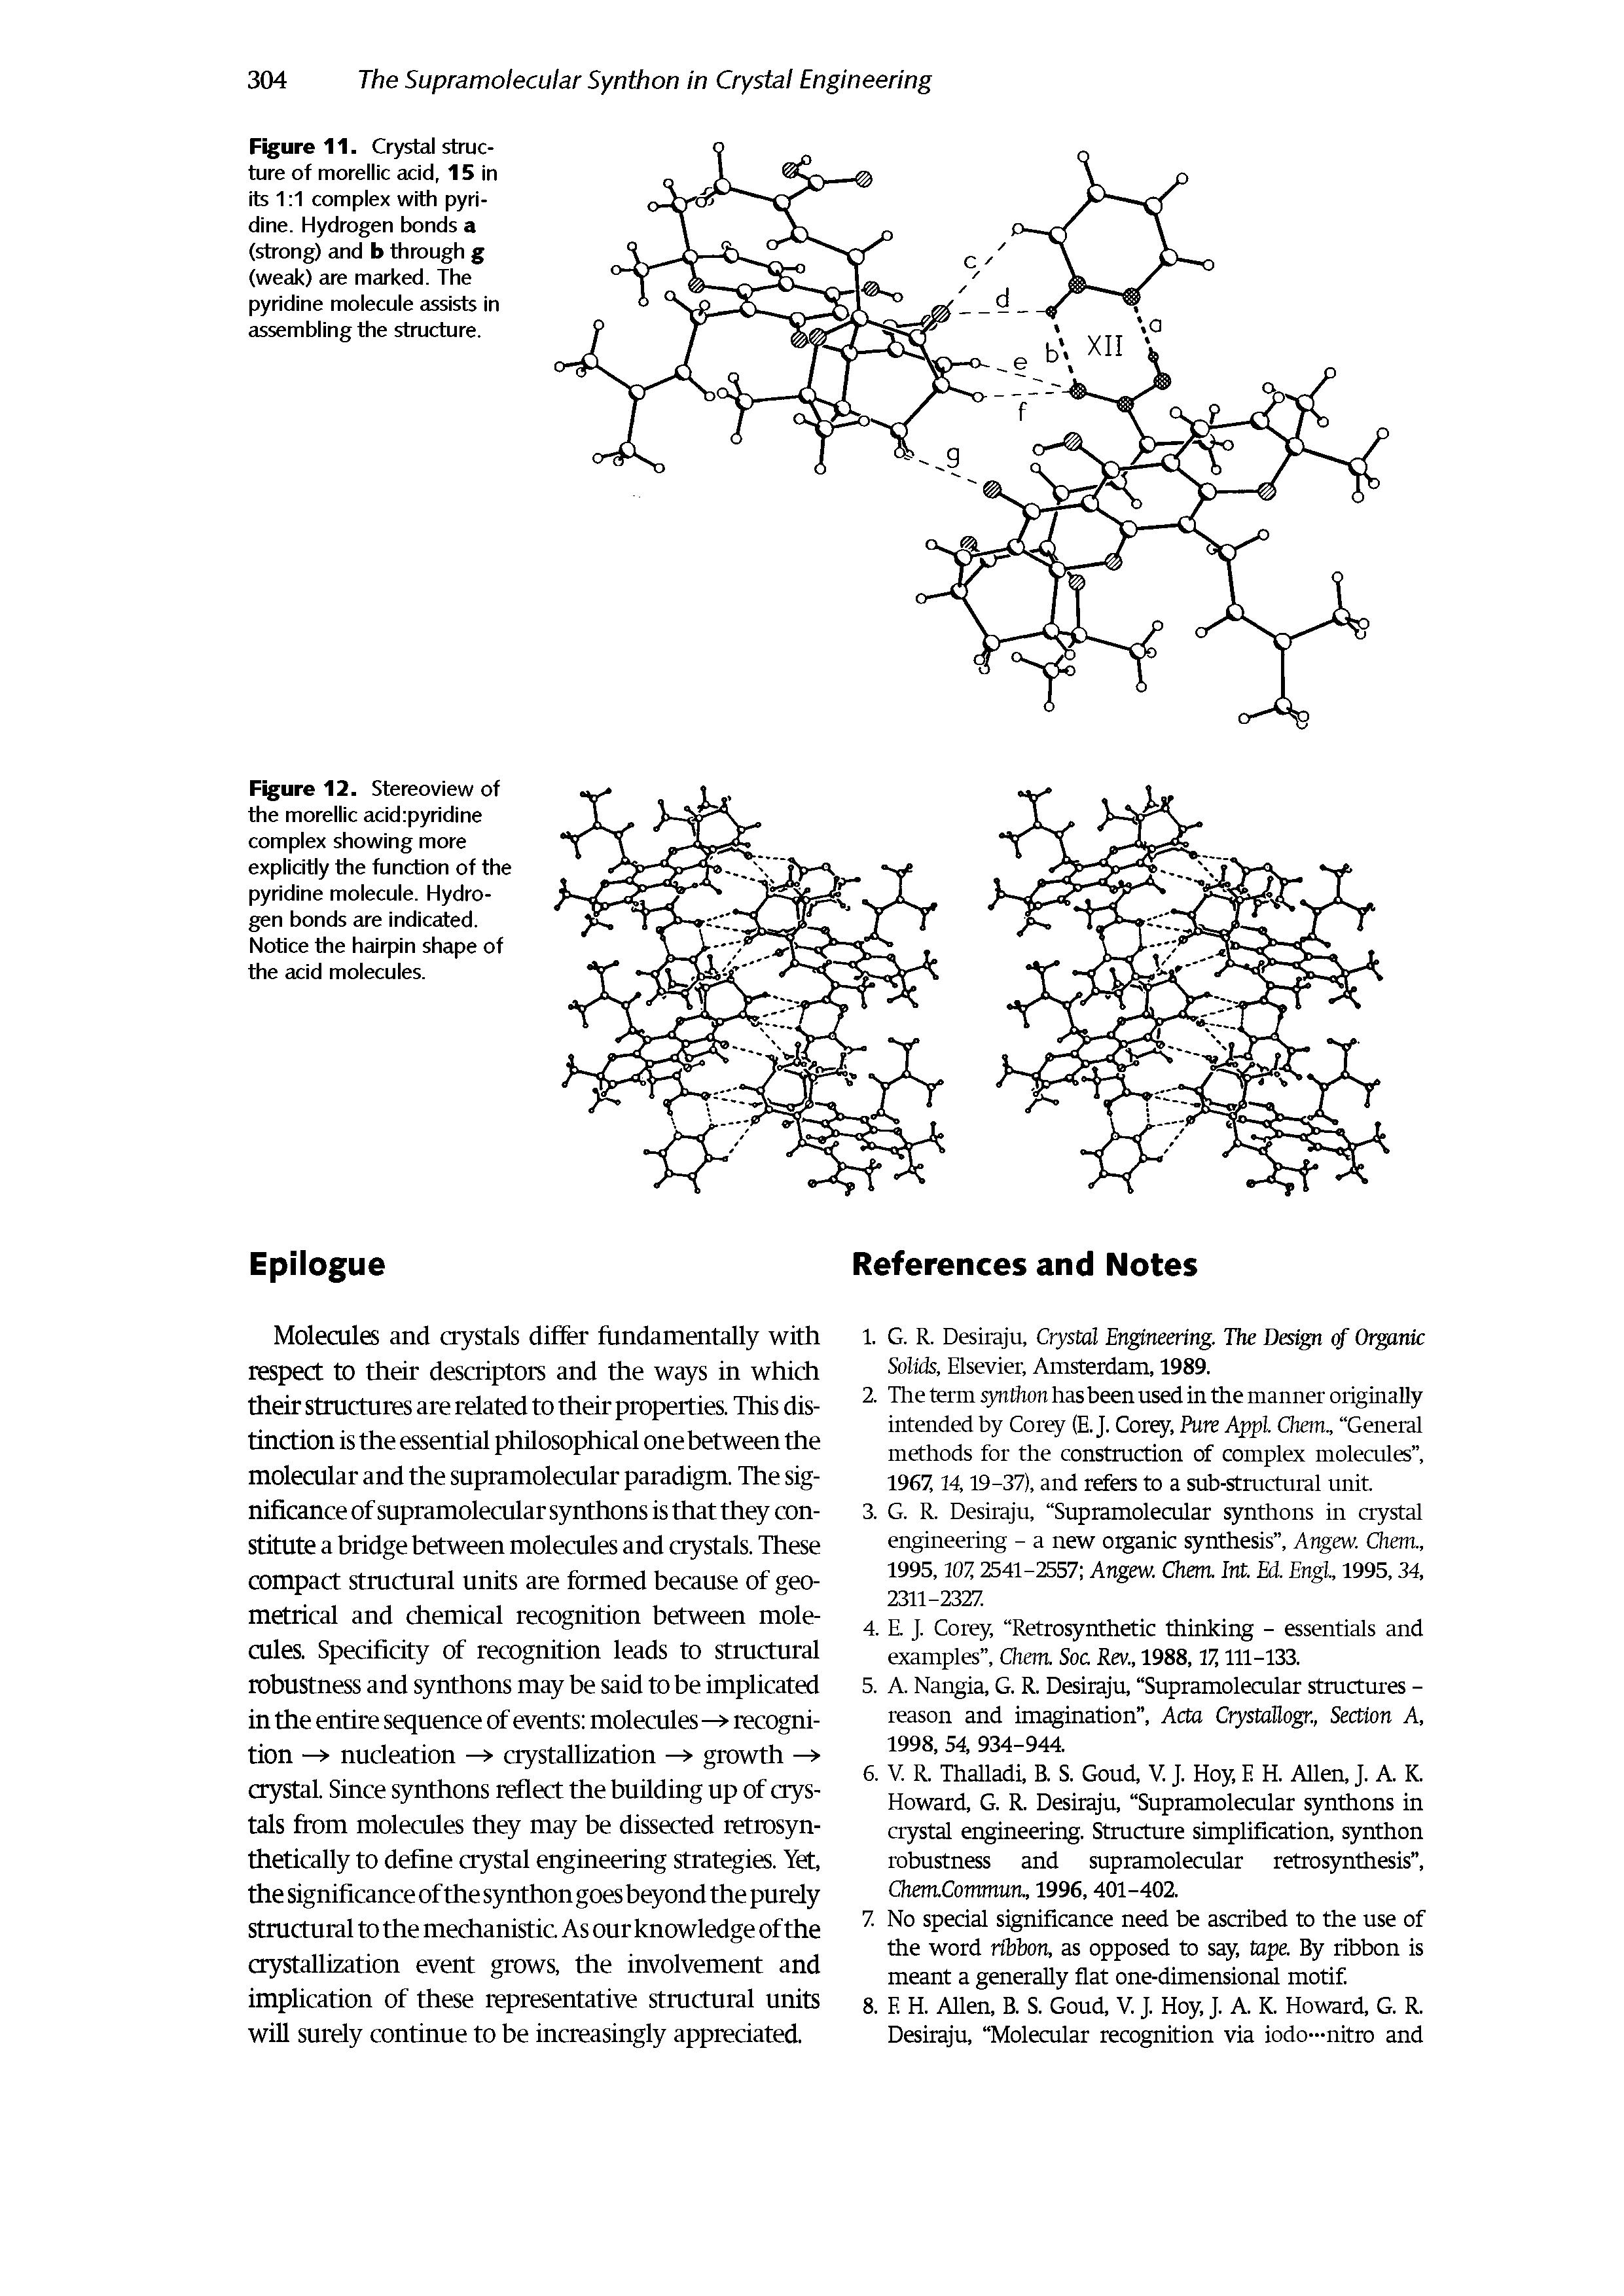 Figure 11. Crystal structure of morellic add, 15 in its 1 1 complex with pyridine. Hydrogen bonds a (strong) and b through g (weak) are marked. The pyridine molecule assists in assembling the structure.